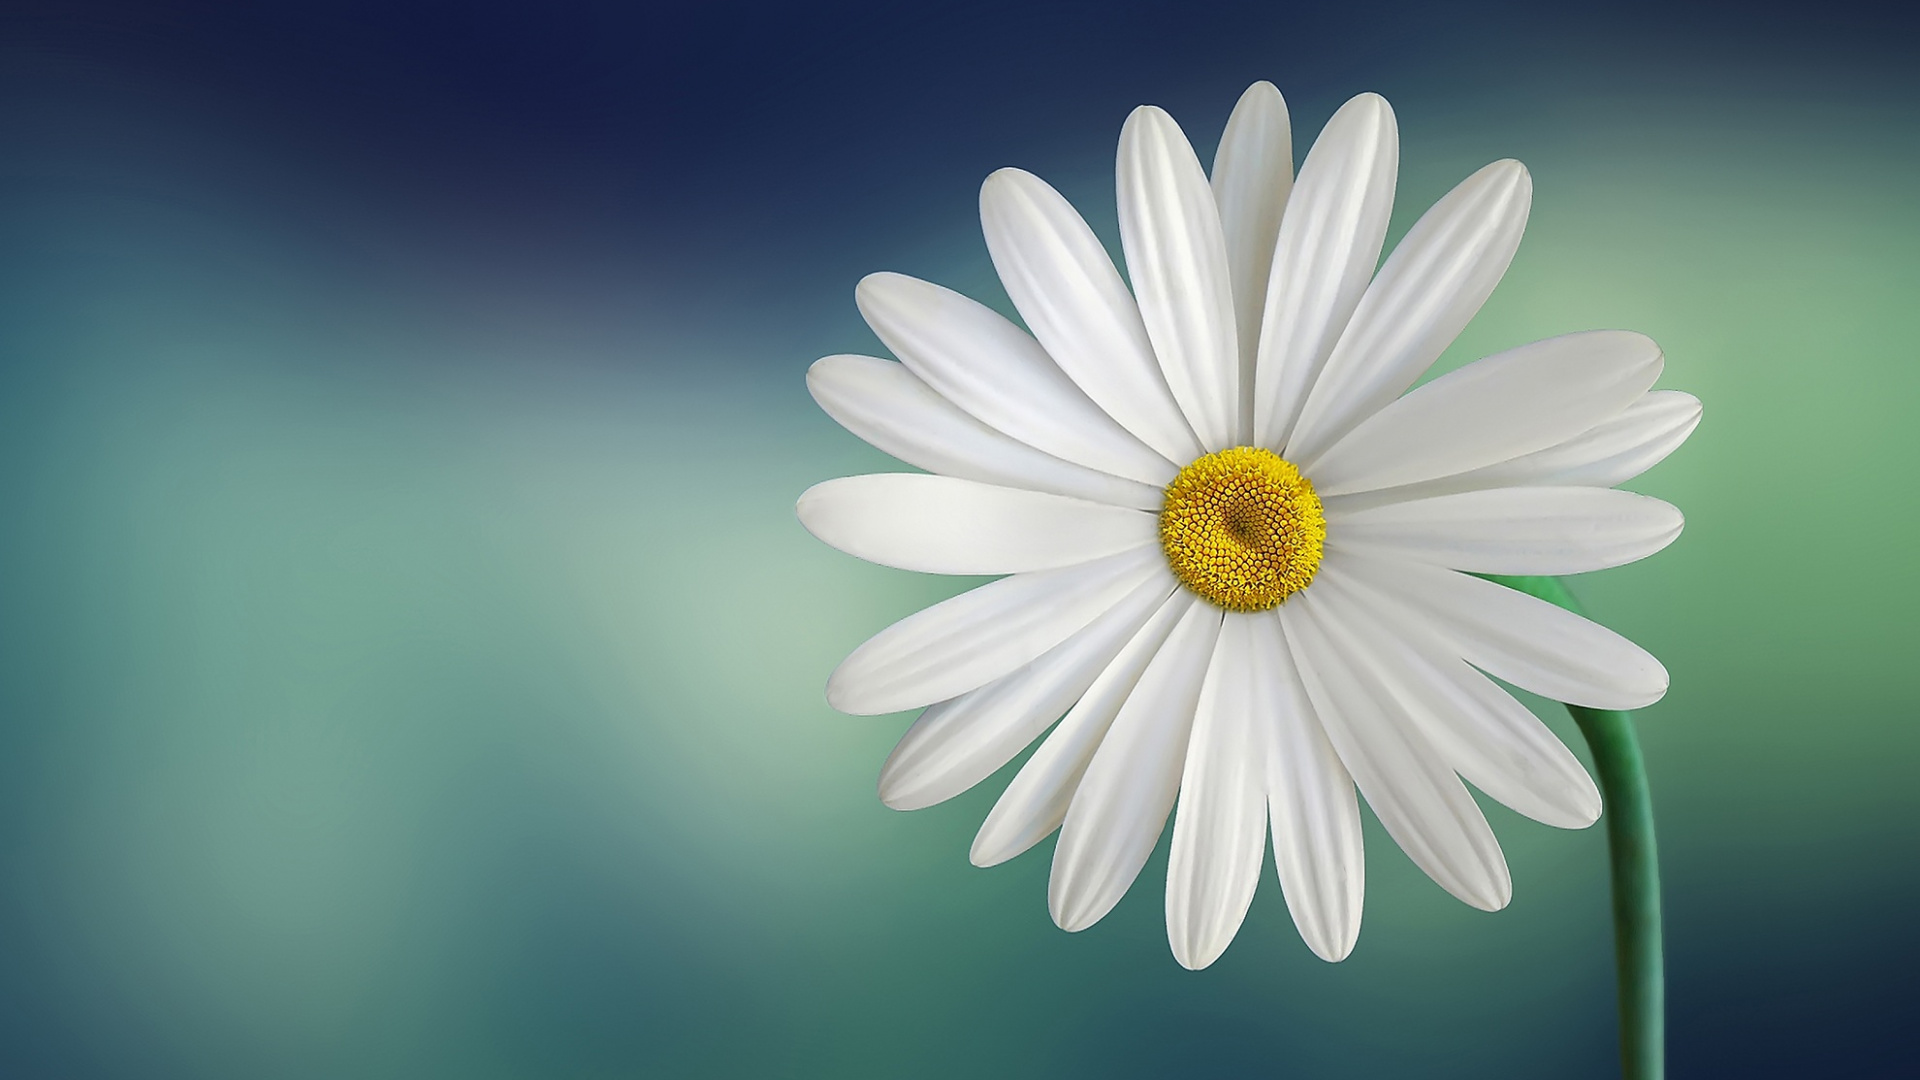 White Daisy in Close up Photography. Wallpaper in 1920x1080 Resolution